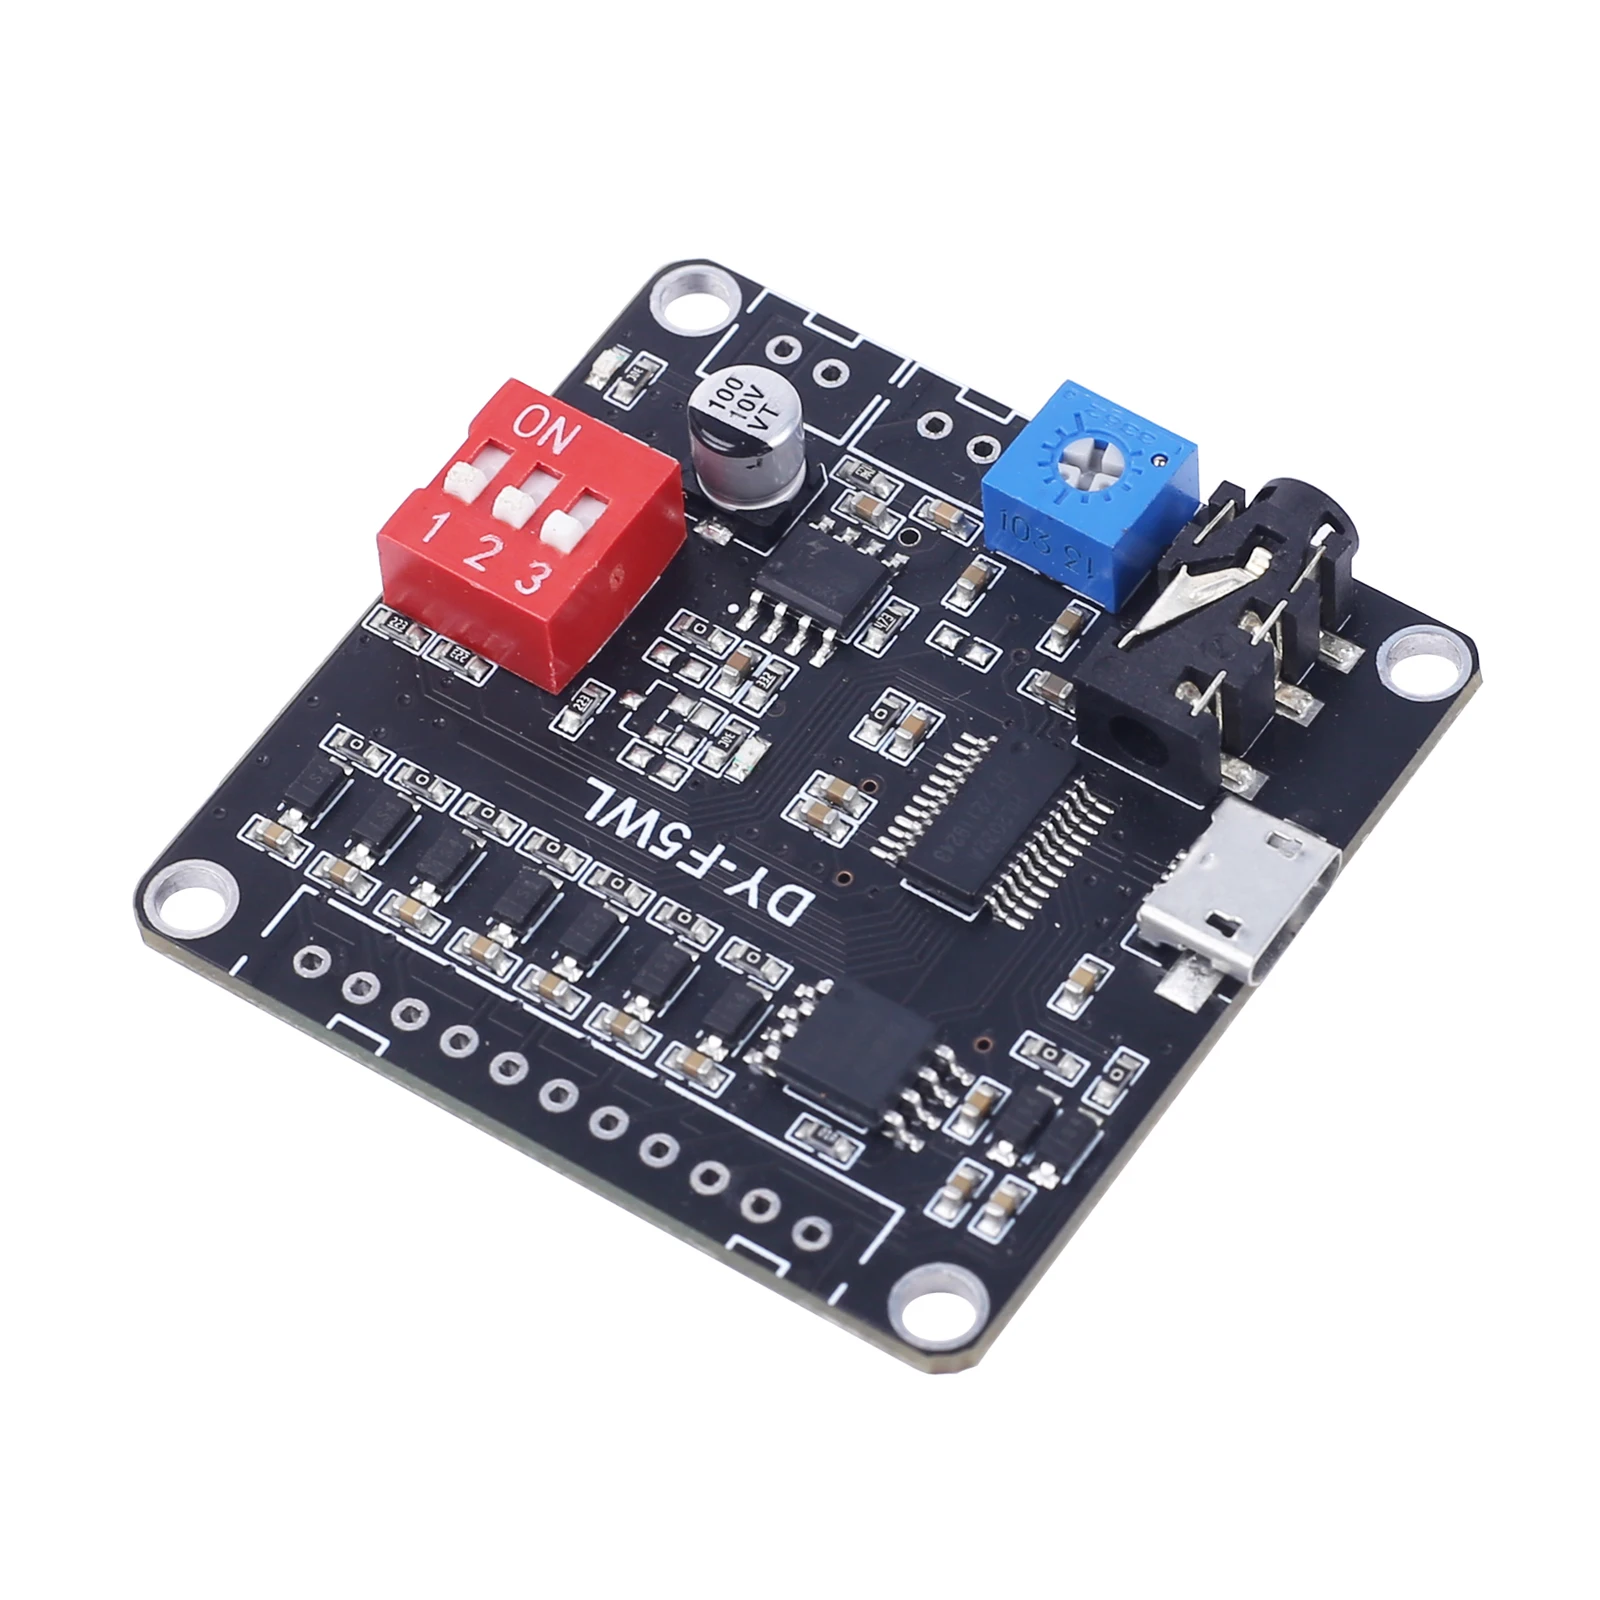 MP3 Player Sound Module Voice Playback Board 5W DC 3.7V/5V Music Power Amplifier 32Mbit Flash WAV UART Controller for Arduino